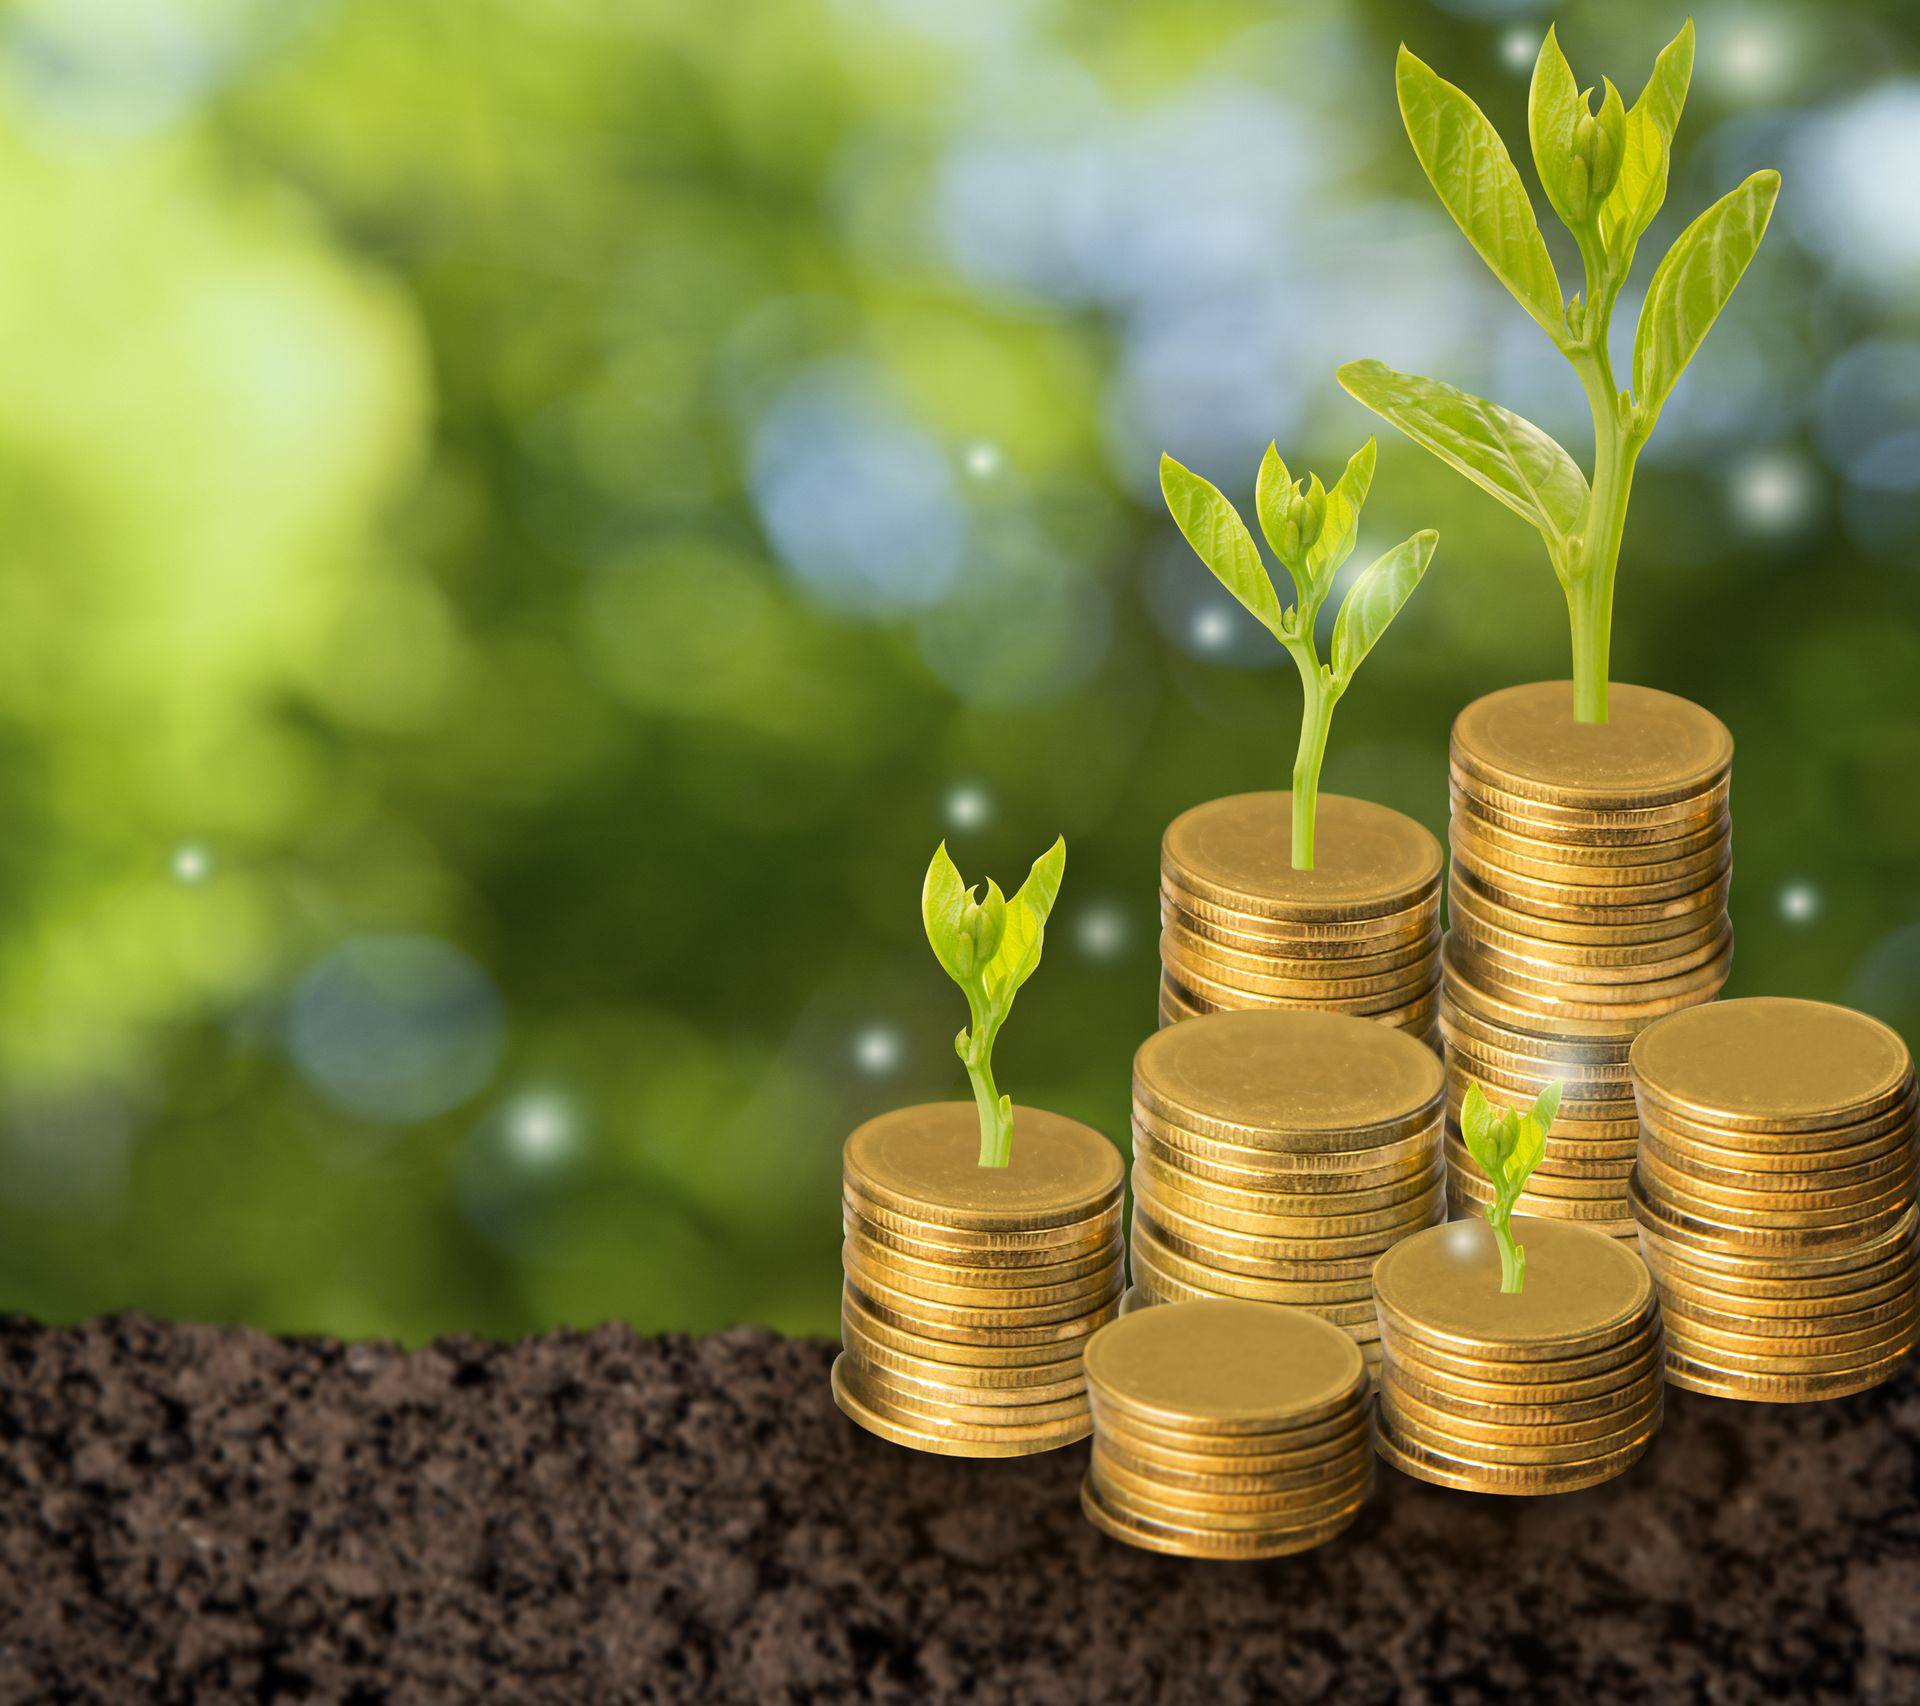 Value drivers for green banking